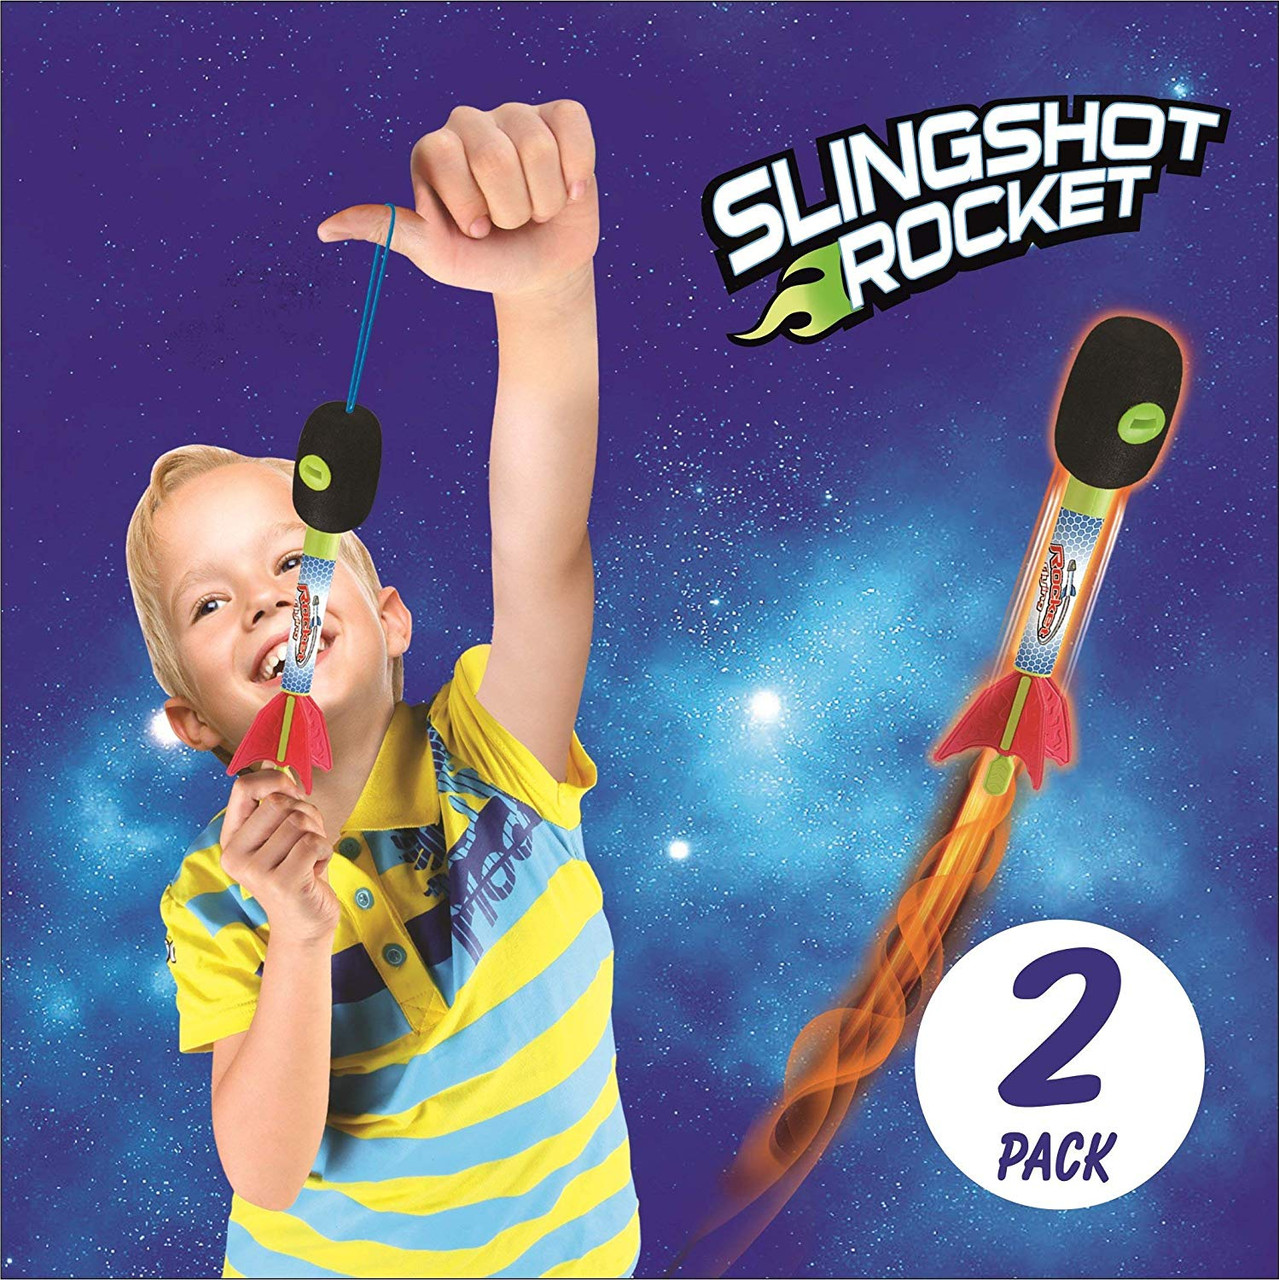 2 Pack Light Up Foam Finger Rockets, Slingshot Rocket Copters, Fun Shooting Games, for Home, Camping, Park, and Party Favor Gifts.